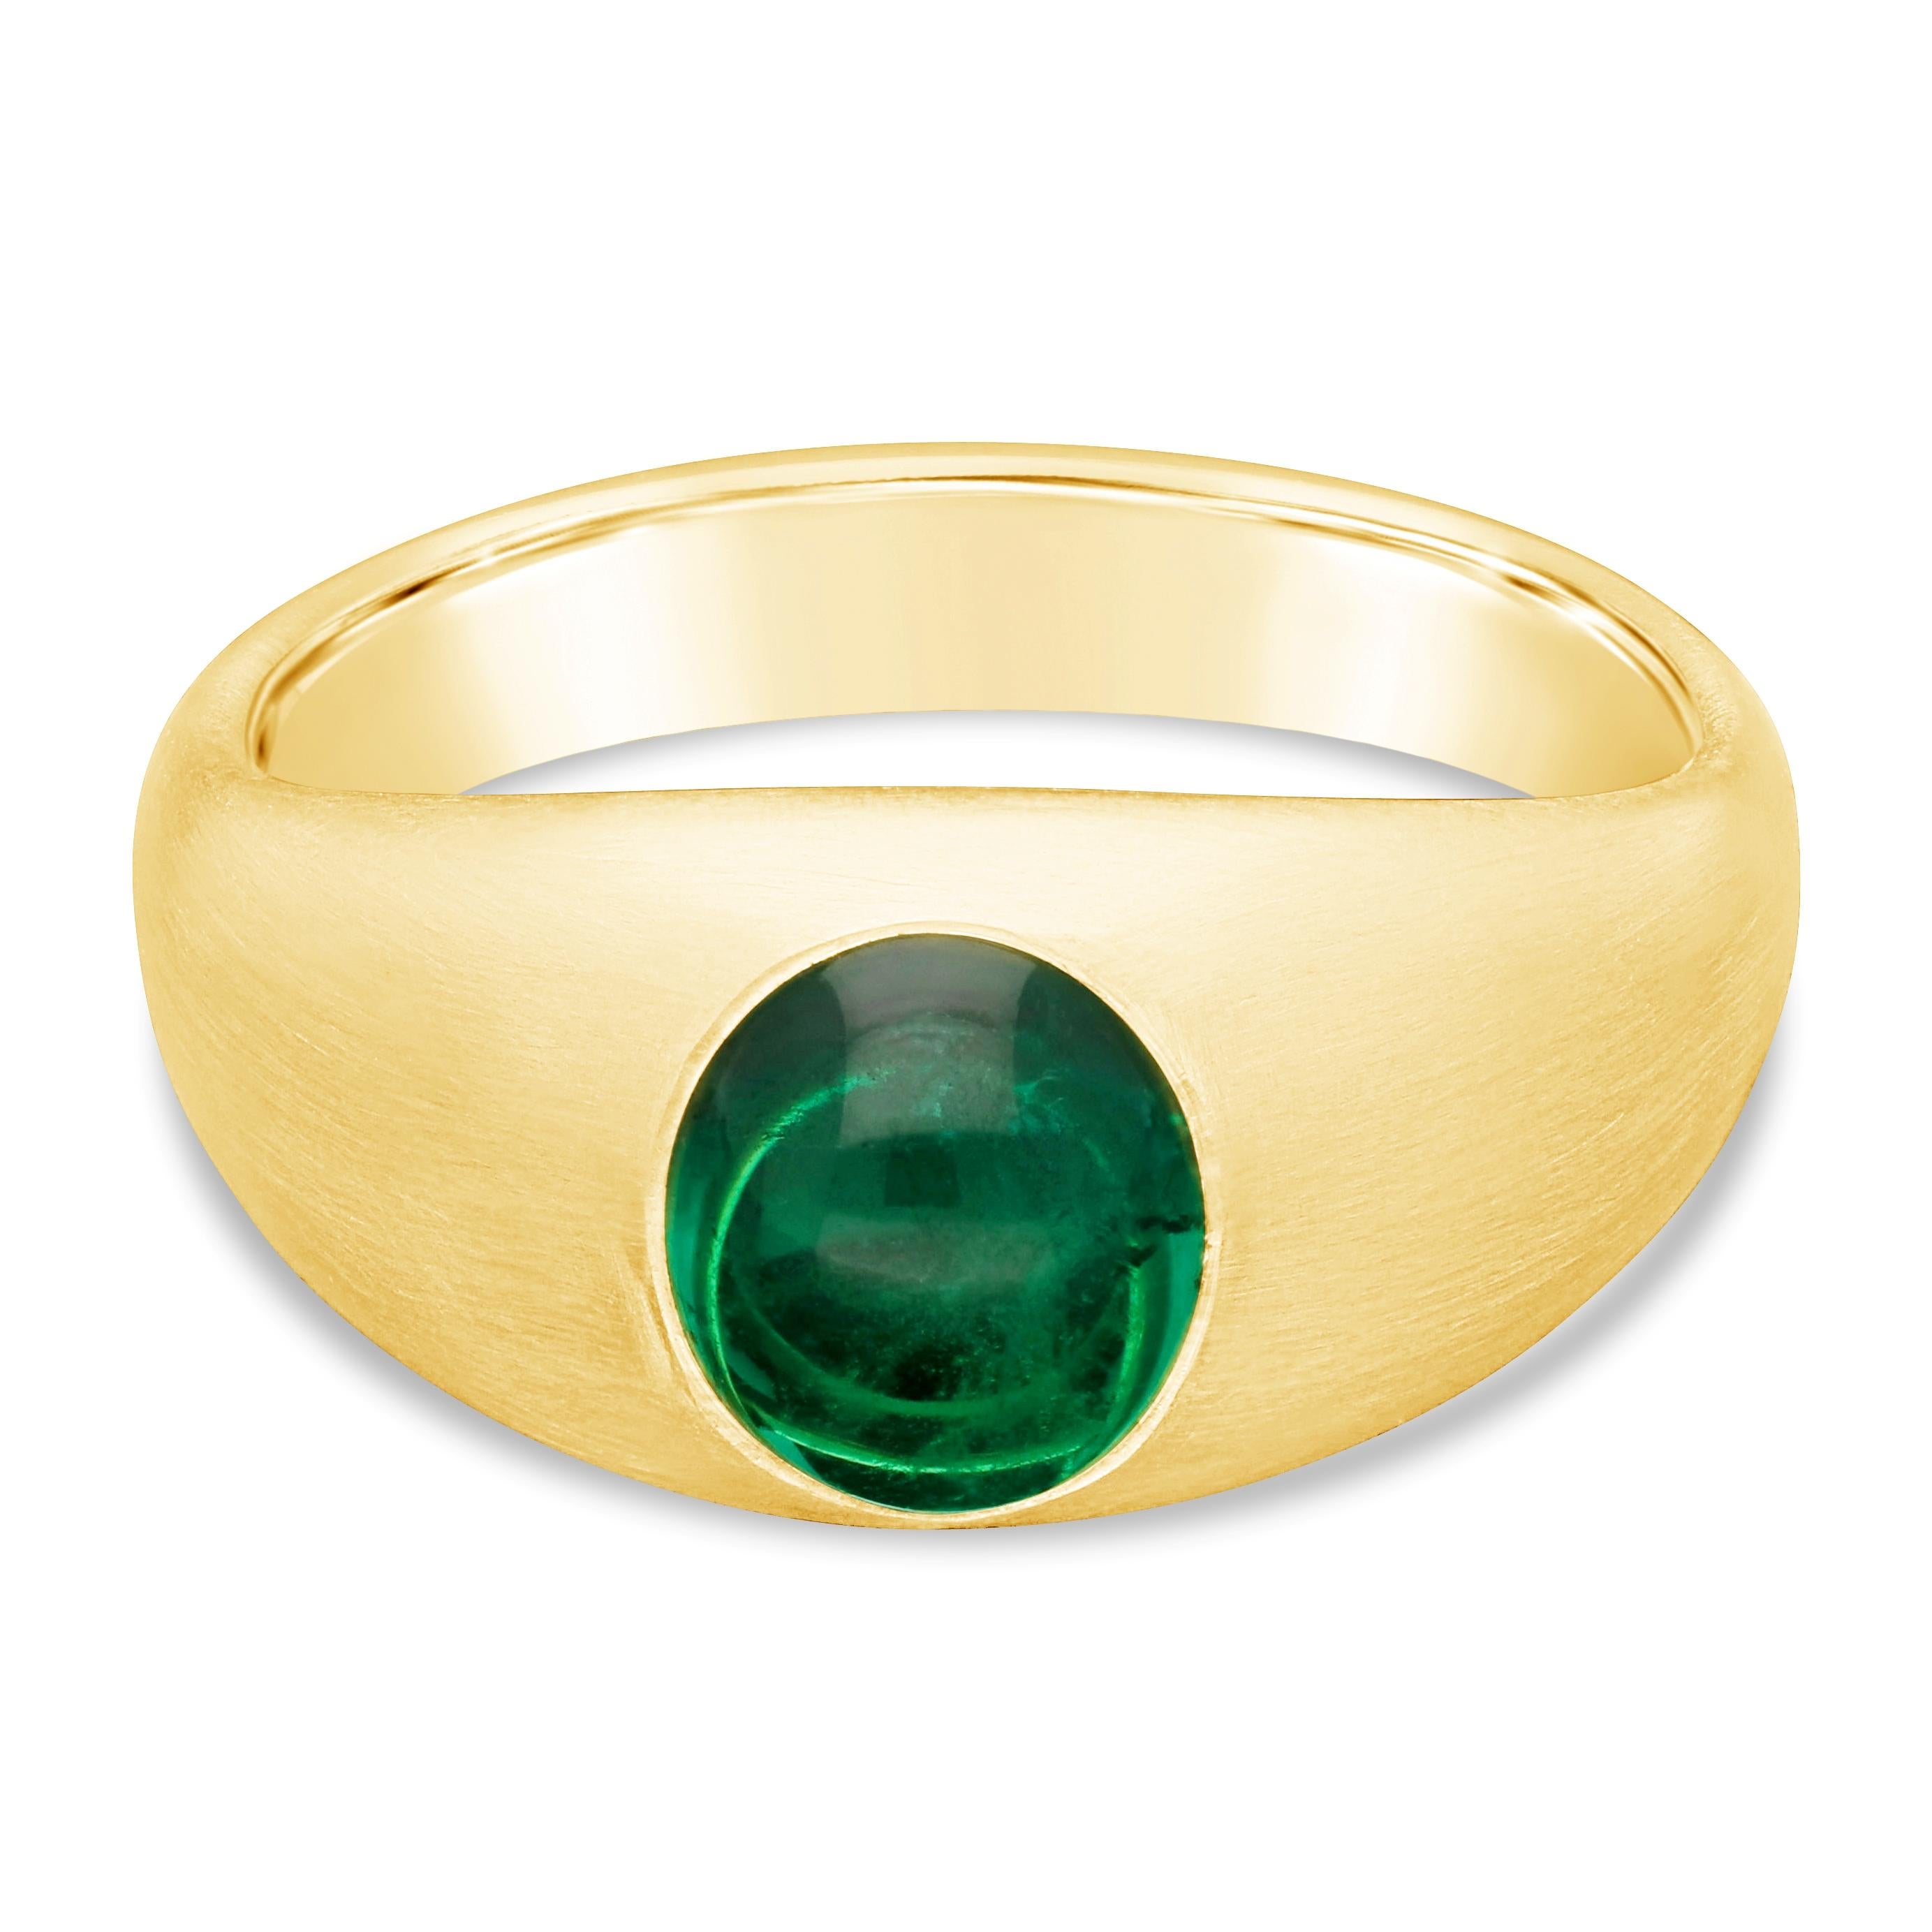 Beautiful gold and emerald gypsy-set ring by Hancocks, set to the centre with a lovely oval cabochon cut Colombian emerald weighing 1.58ct within a wonderfully rich and tactile 22ct yellow gold wide tapering band with satin finish.